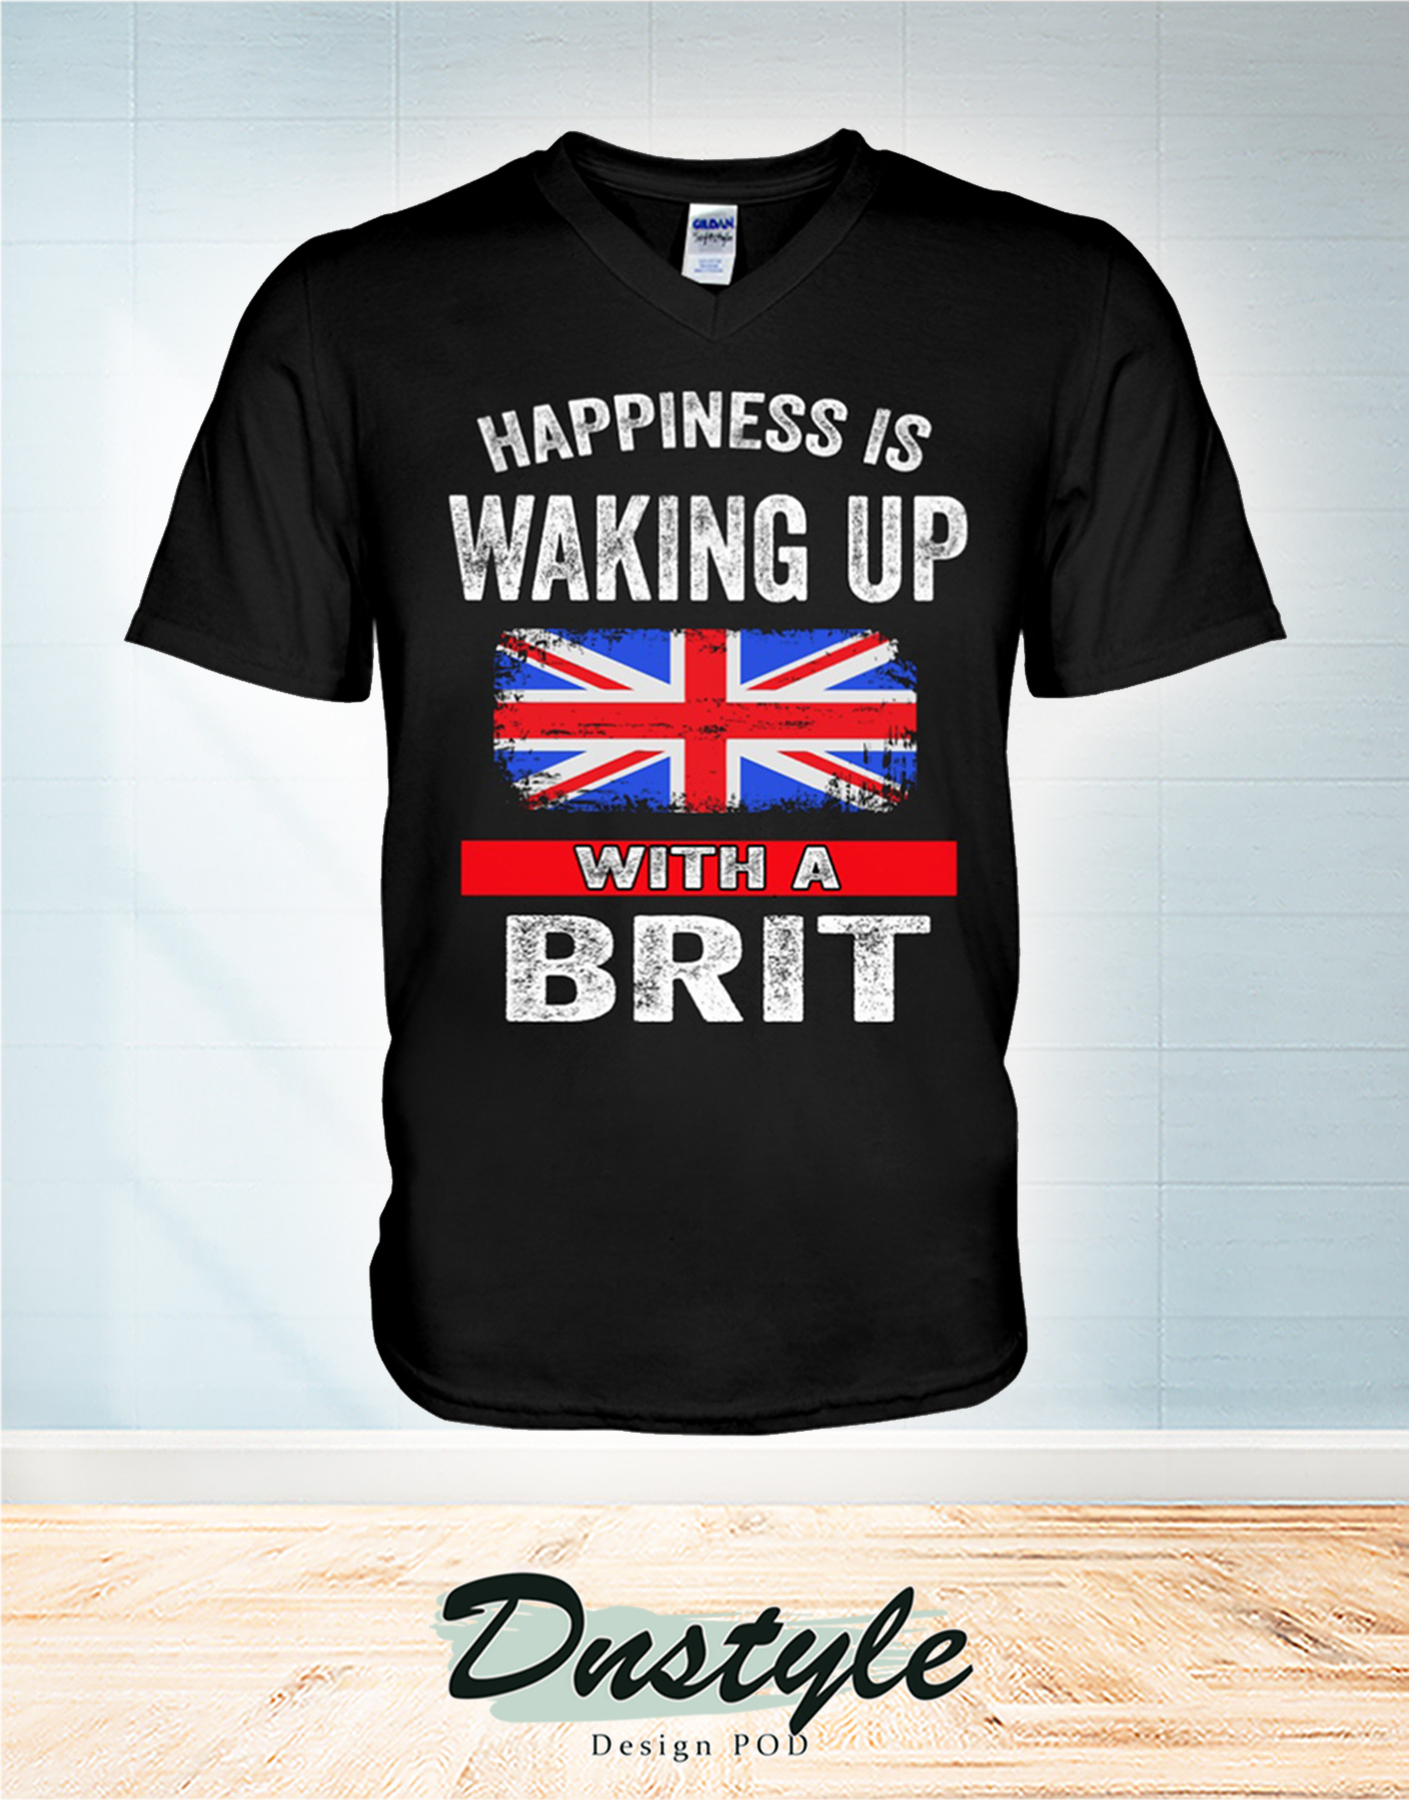 Happiness is waking up with a Brit t-shirt